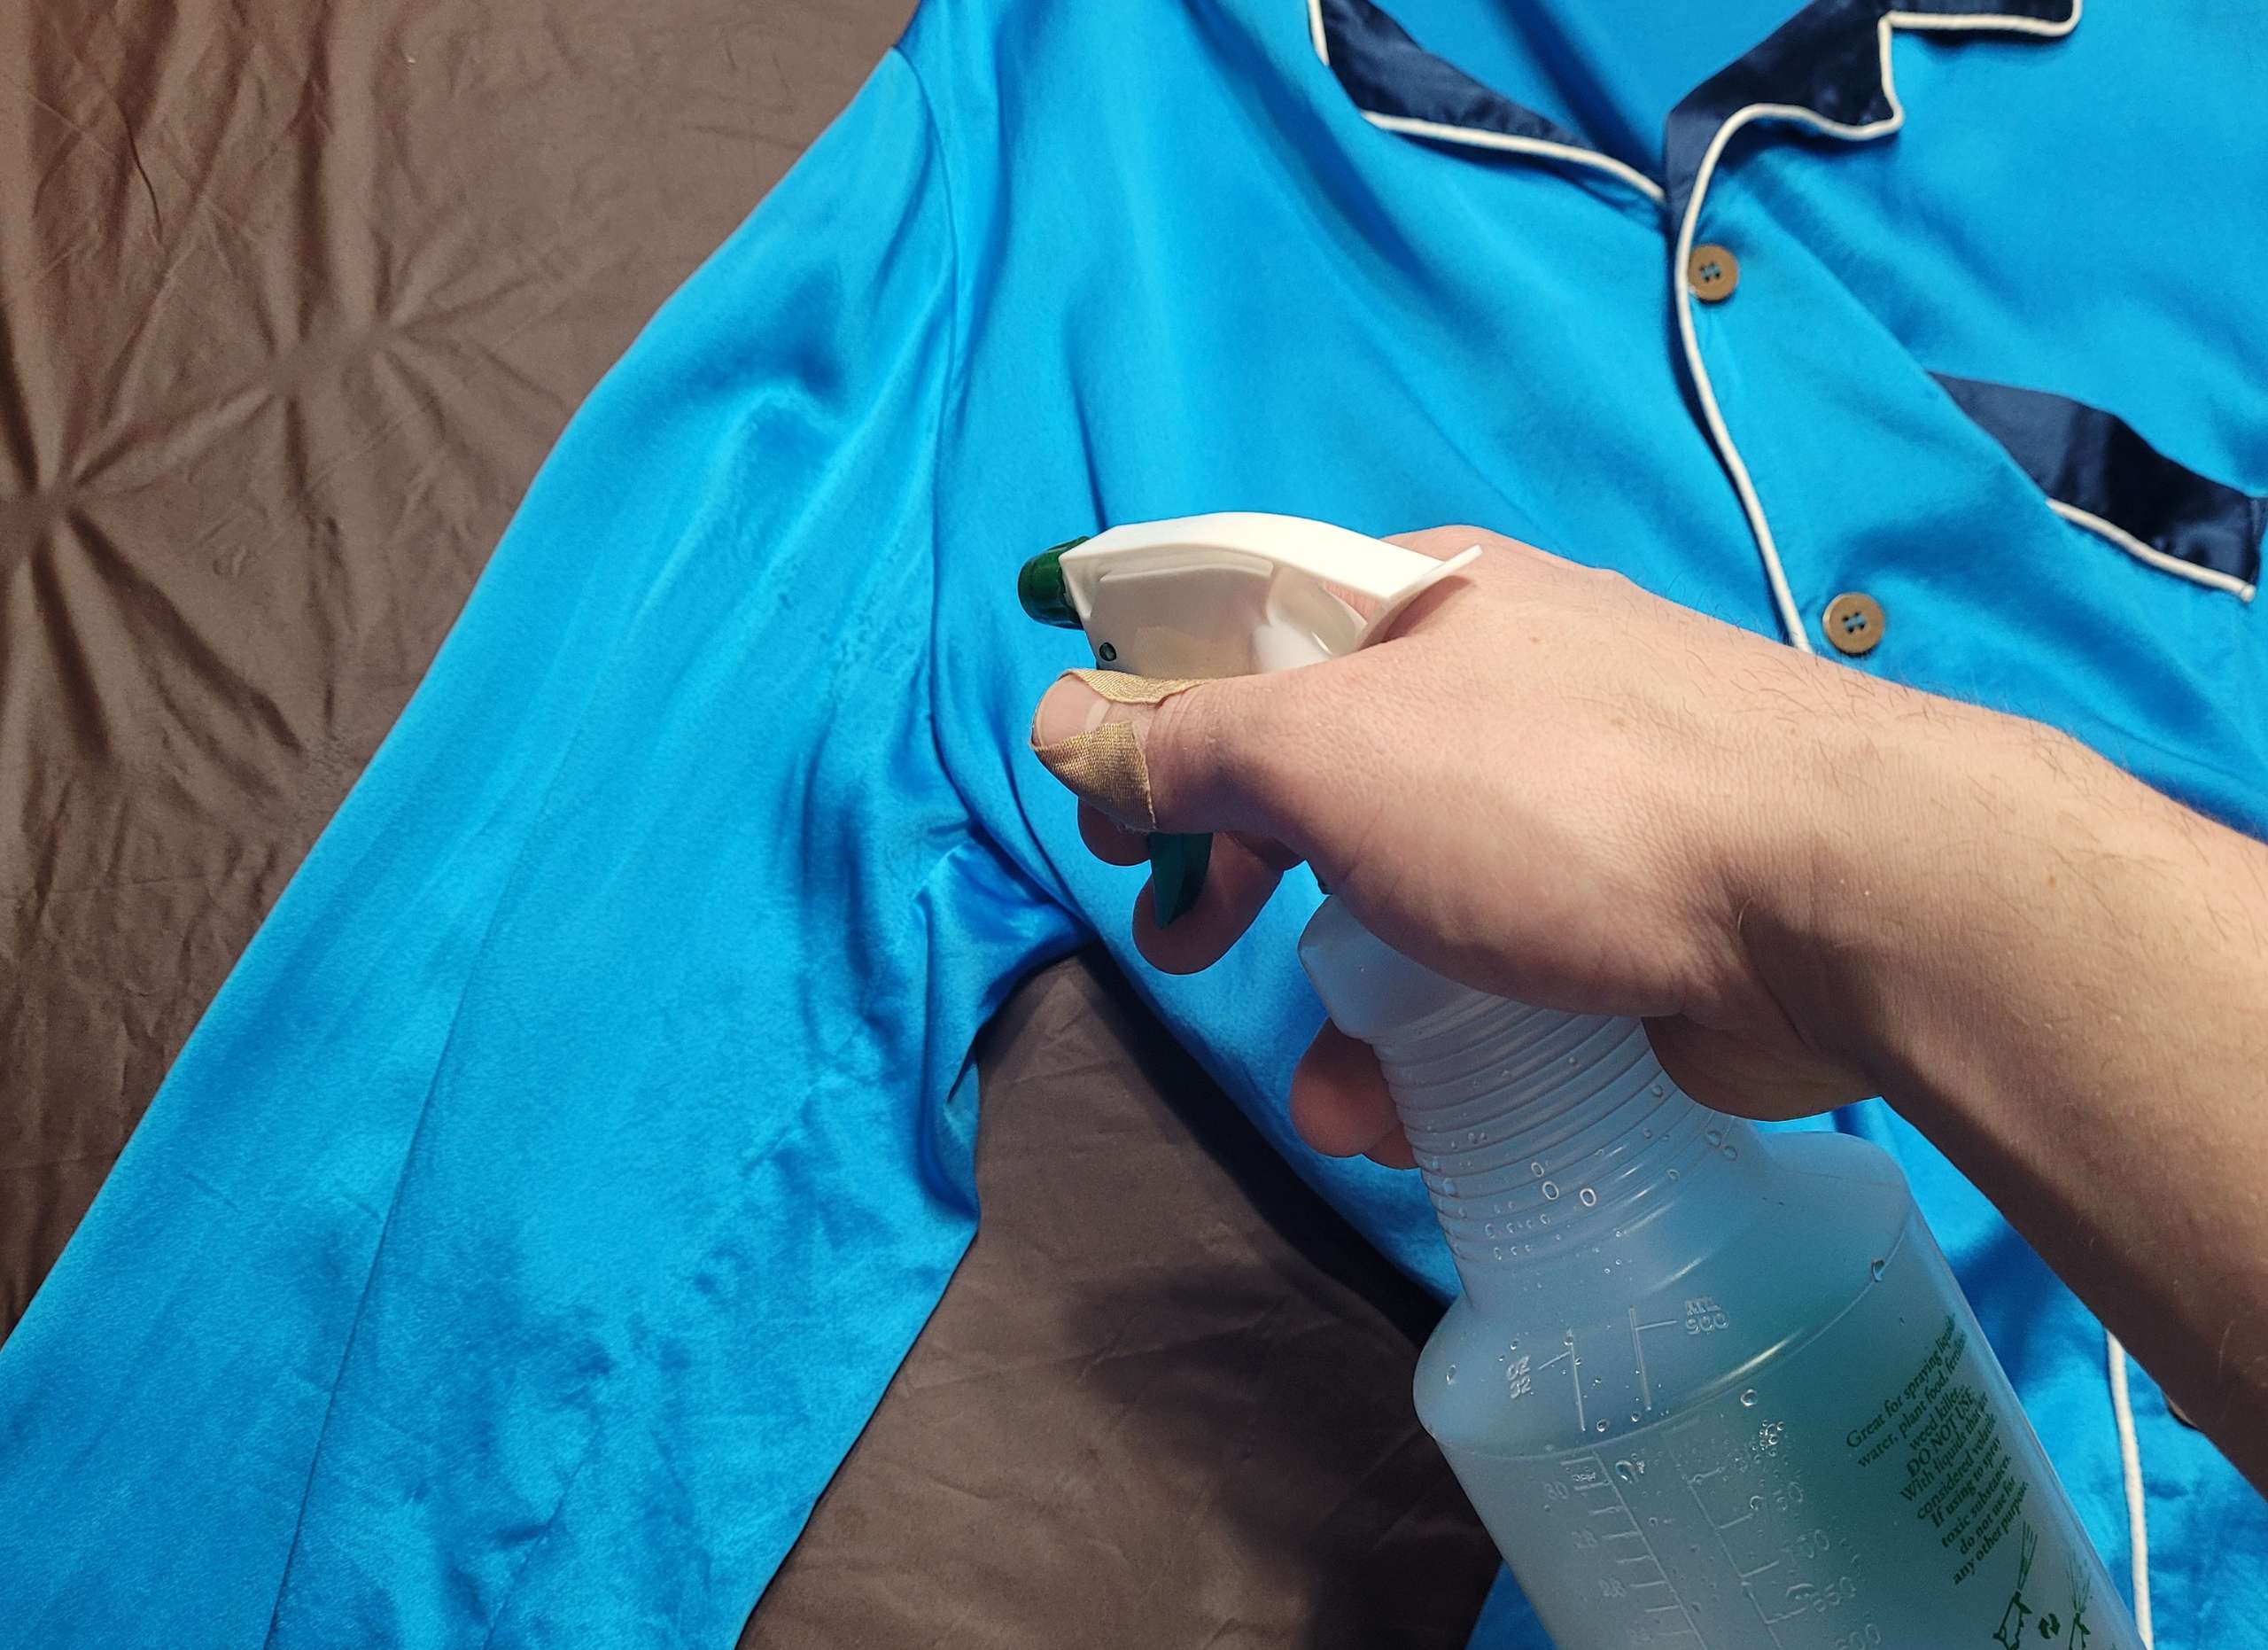 photo of a person spraying a cleaning solution onto sweat stains of silk pajamas